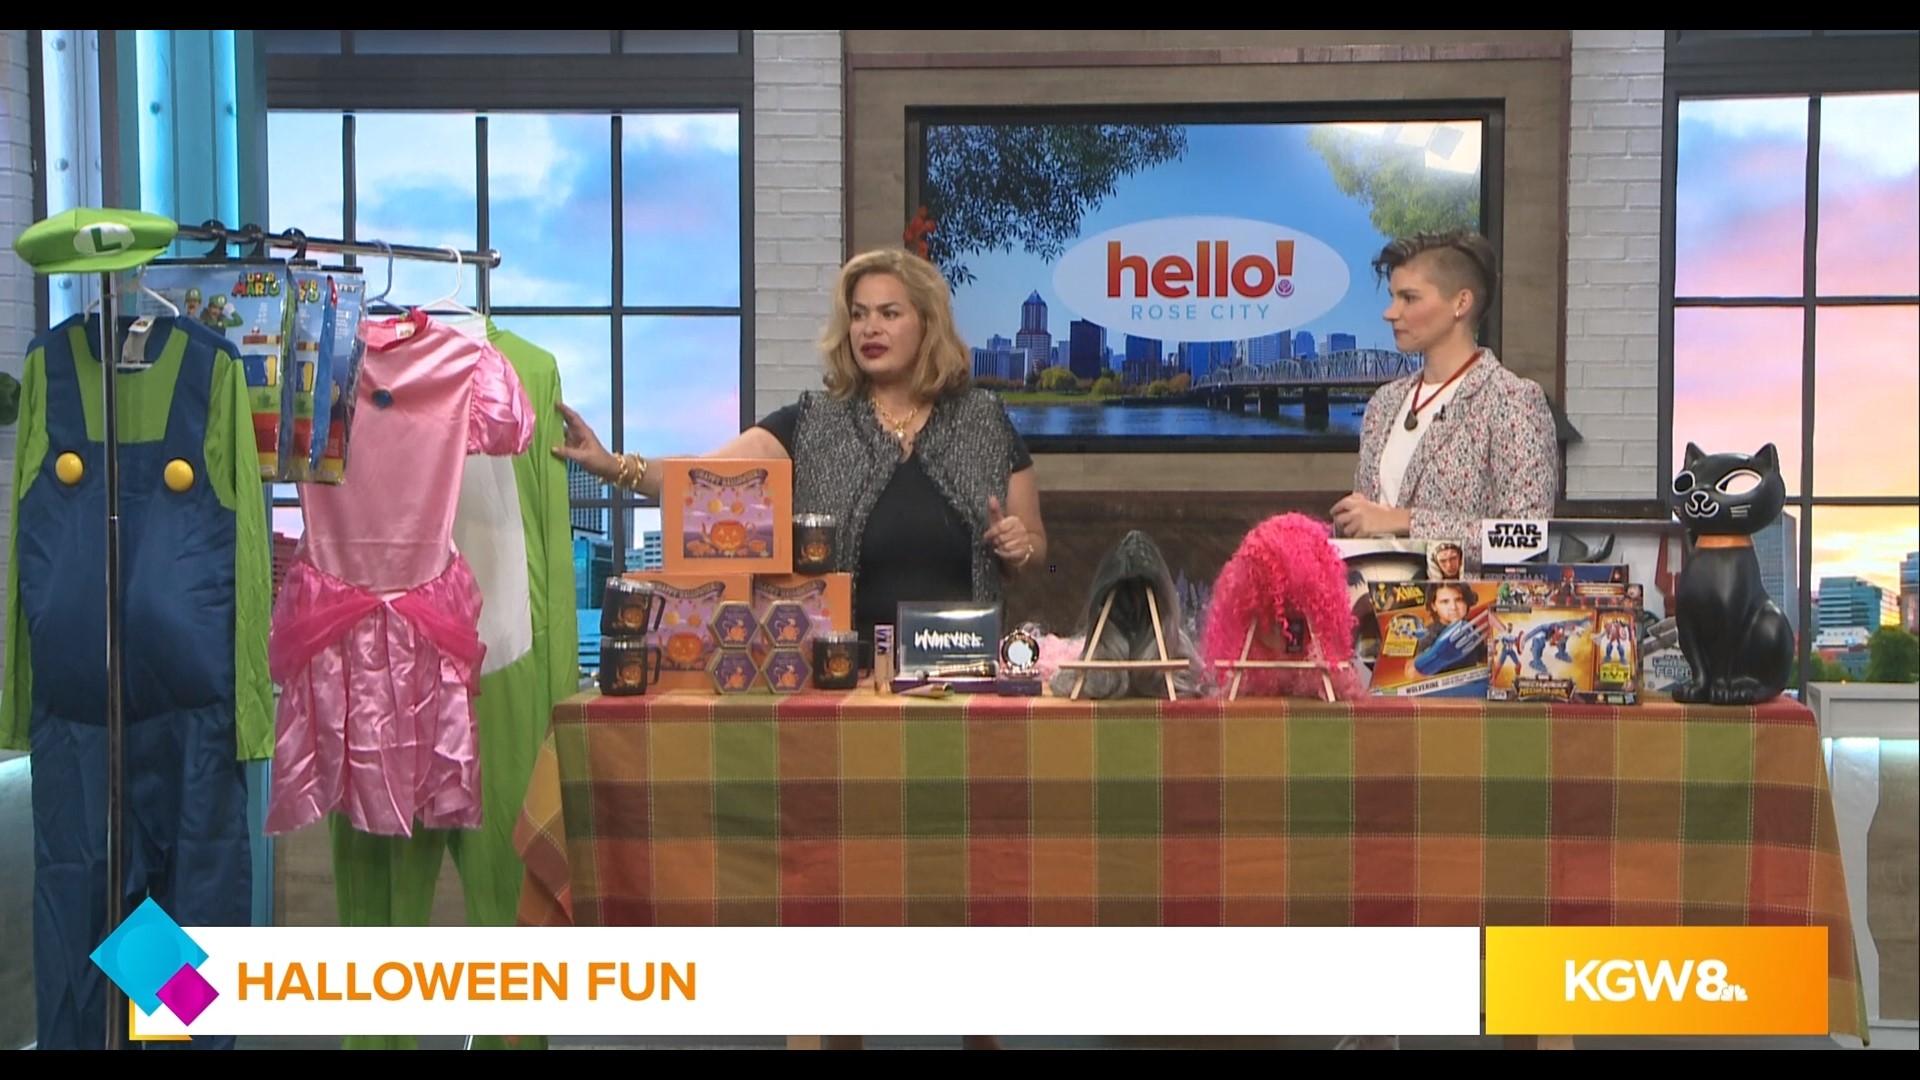 From costumes and wigs, to decorations and other treats, lifestyle blogger Kathy Copcutt has ideas for everyone